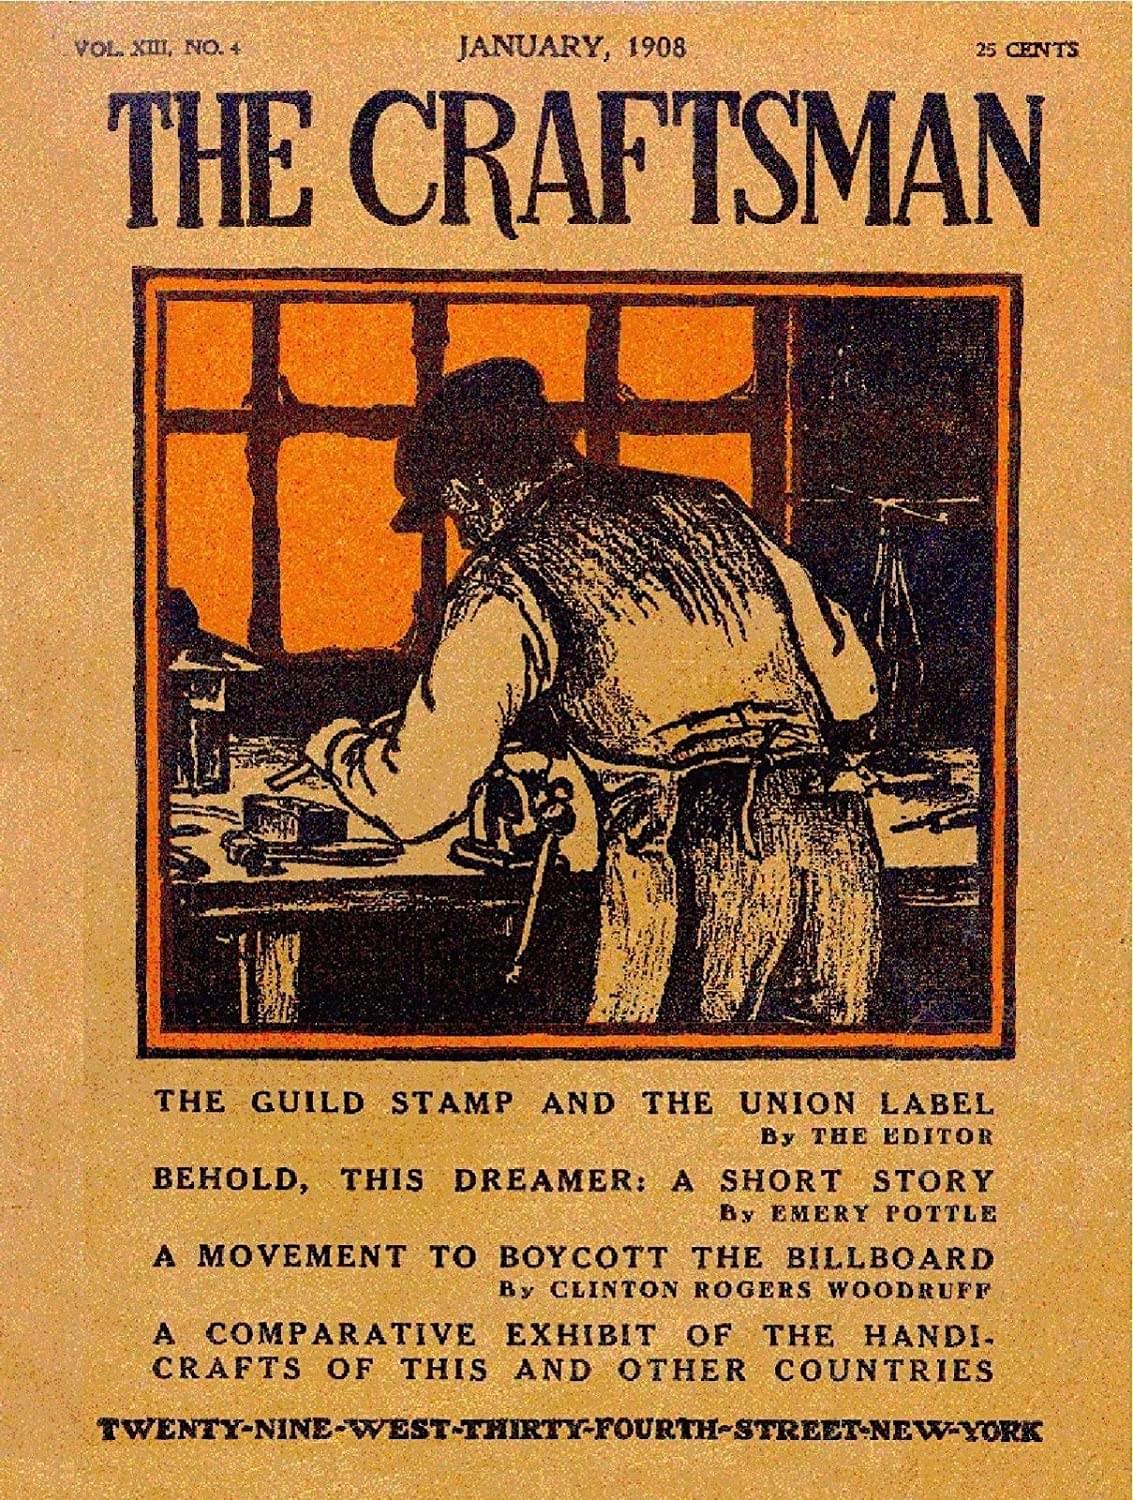 Cover for catalogue of craftsman furniture by Gustav Stickley